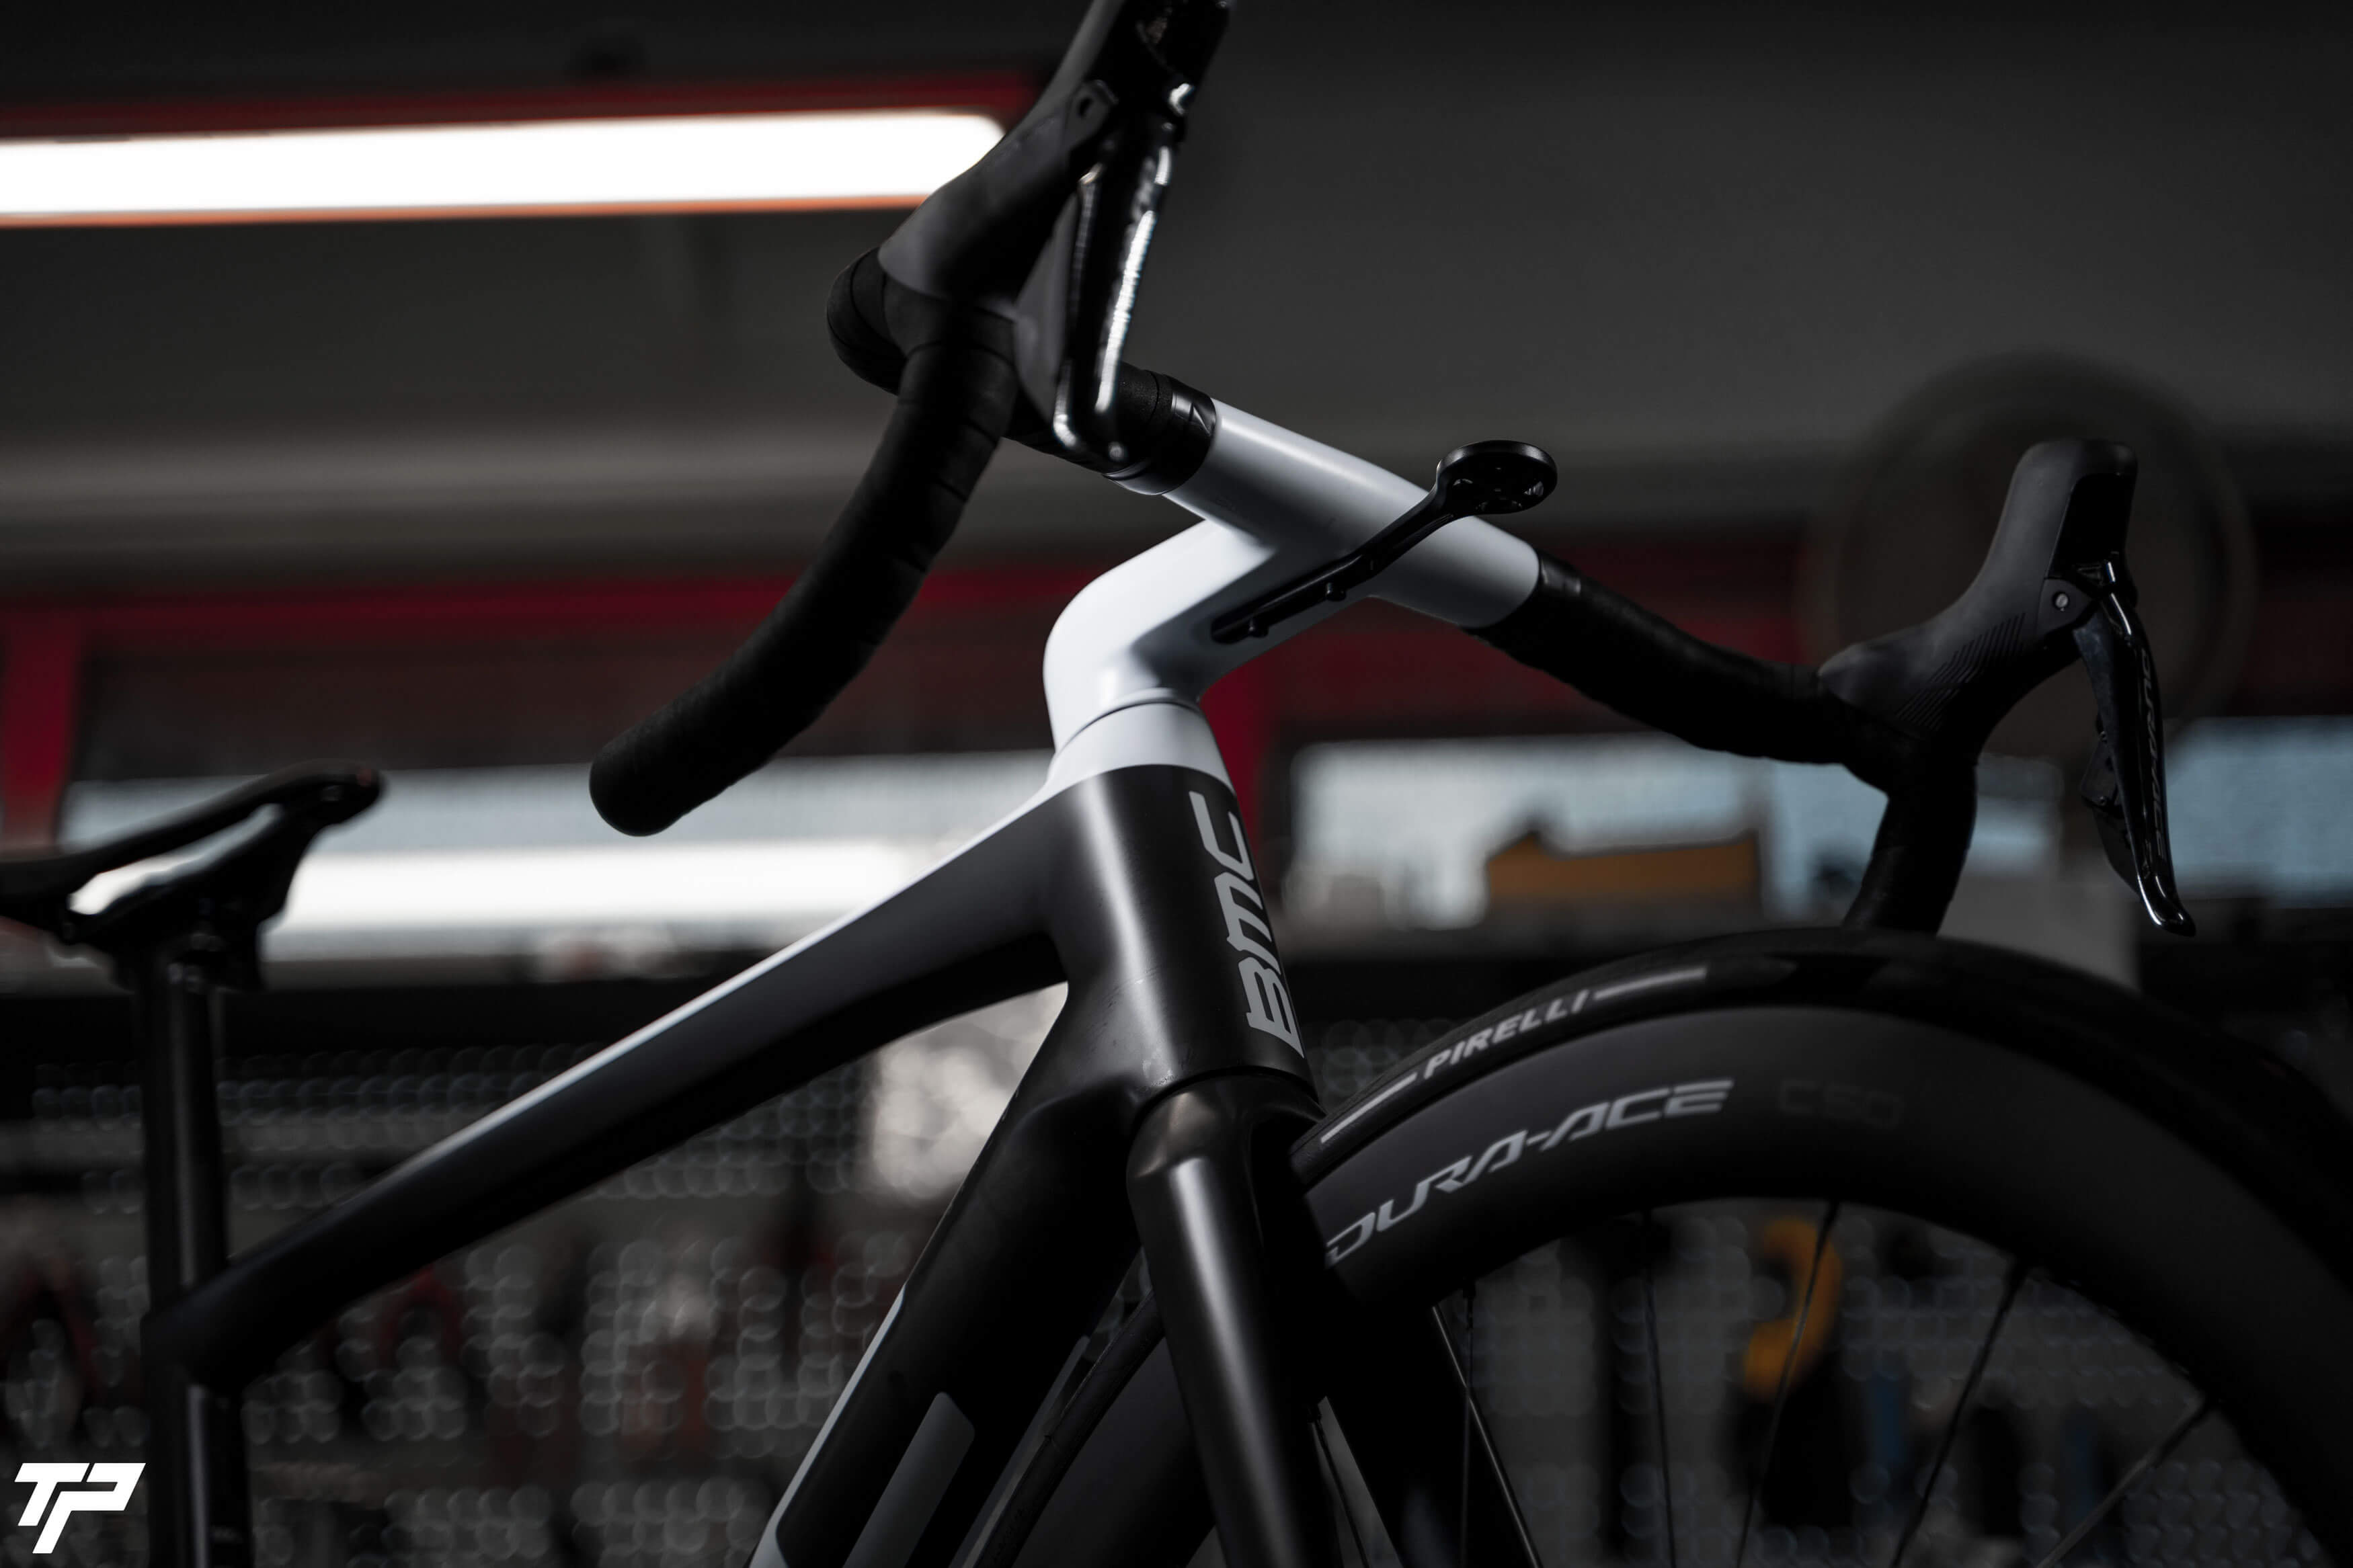 BMC TEAMMACHINE SLR01, SWISS QUALITY AND PERFORMANCE WITHOUT COMPROMISE